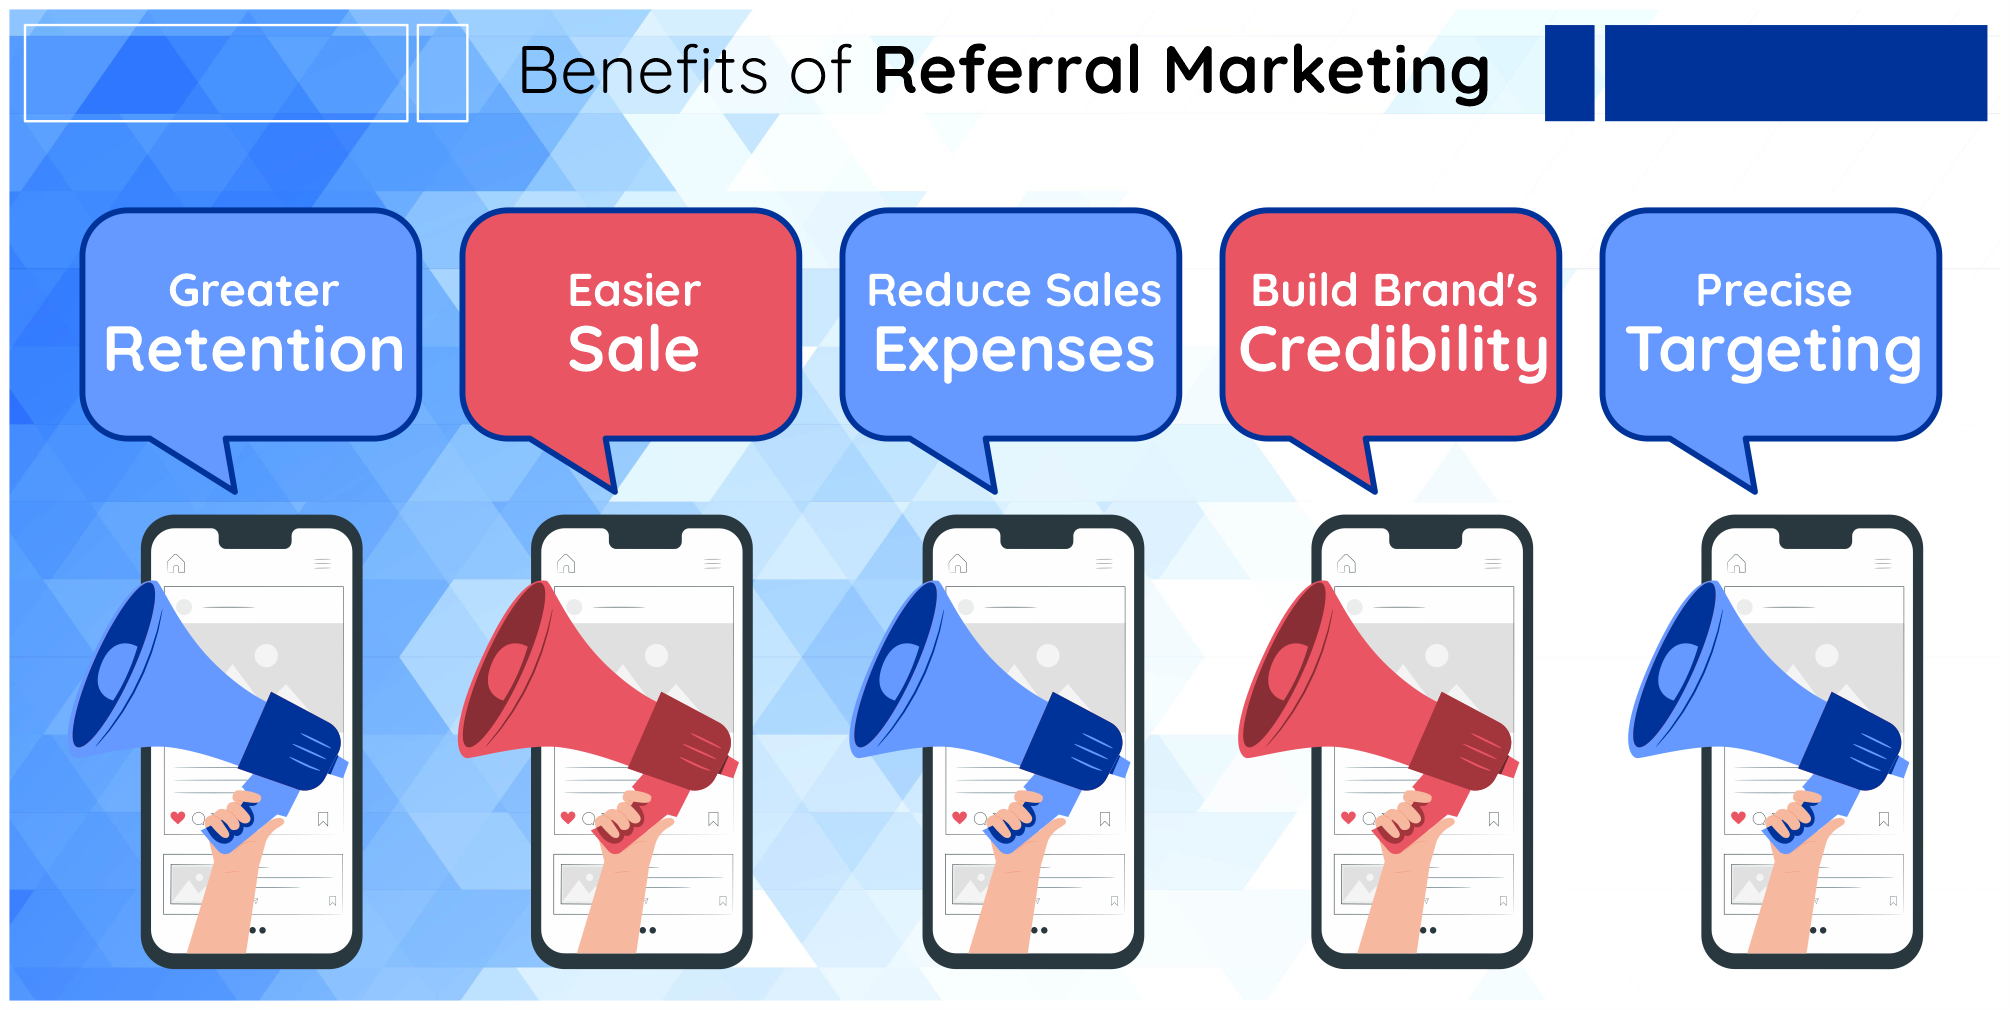 How Does Referral Marketing Help Businesses To Grow?